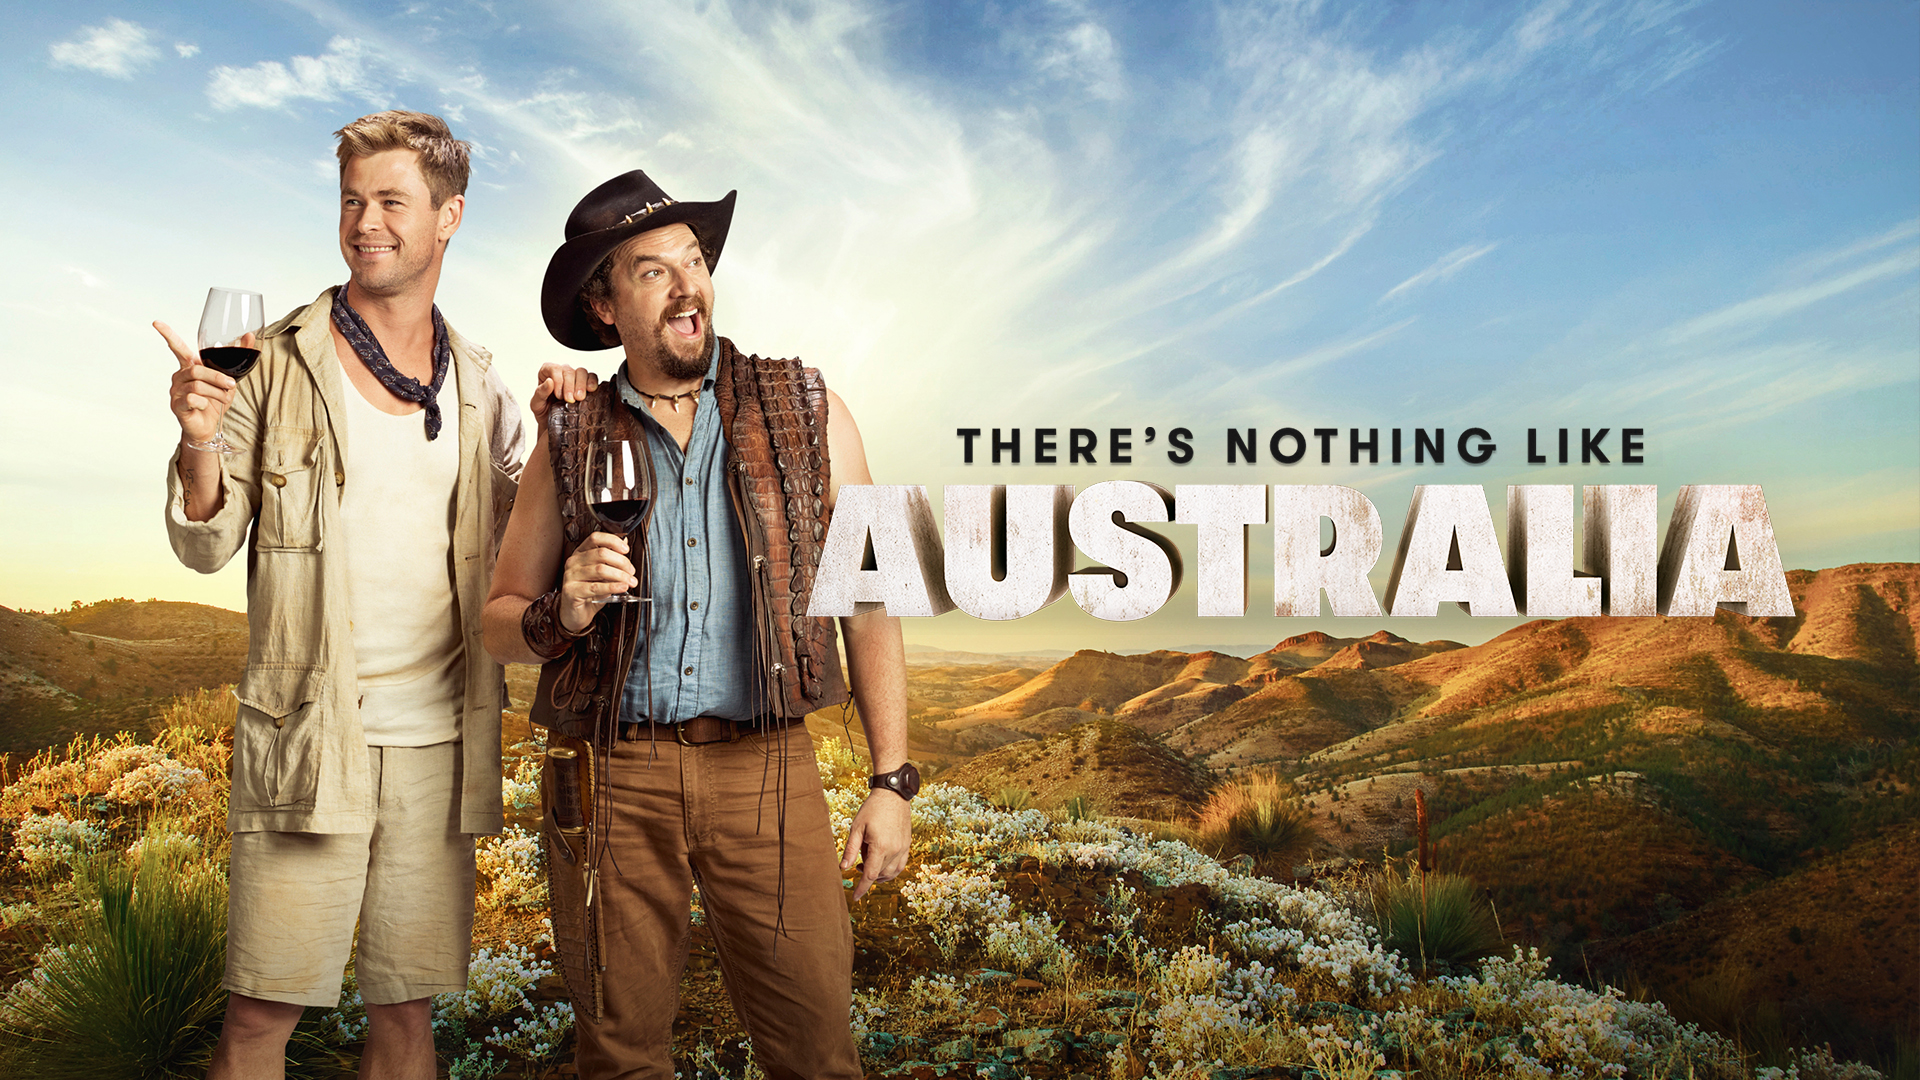 New Dundee campaign featuring Chris Hemsworth and Danny McBride with Australian wildlife